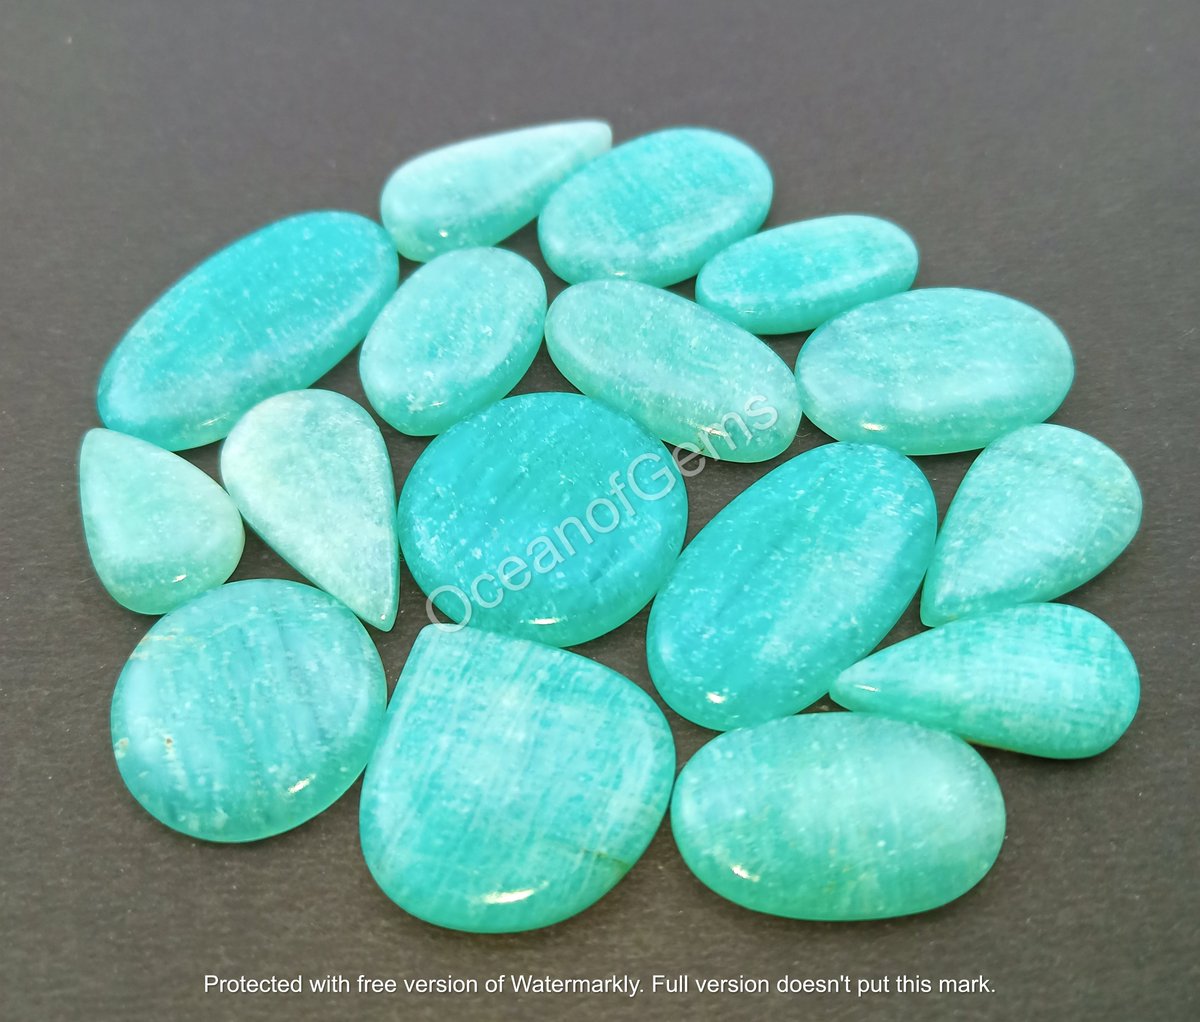 Natural Green Amazonite Cabochon Gemstone

$6 Each Random Pick
Worldwide Shipping$6
Combined Shipping Available
Size 20 to 35mm Approx
Free Drilling Service

#GreenAmazonite #amazonite #amazoniteearrings #amazonitenecklace #amazonitejewellery #amazonitebracelet